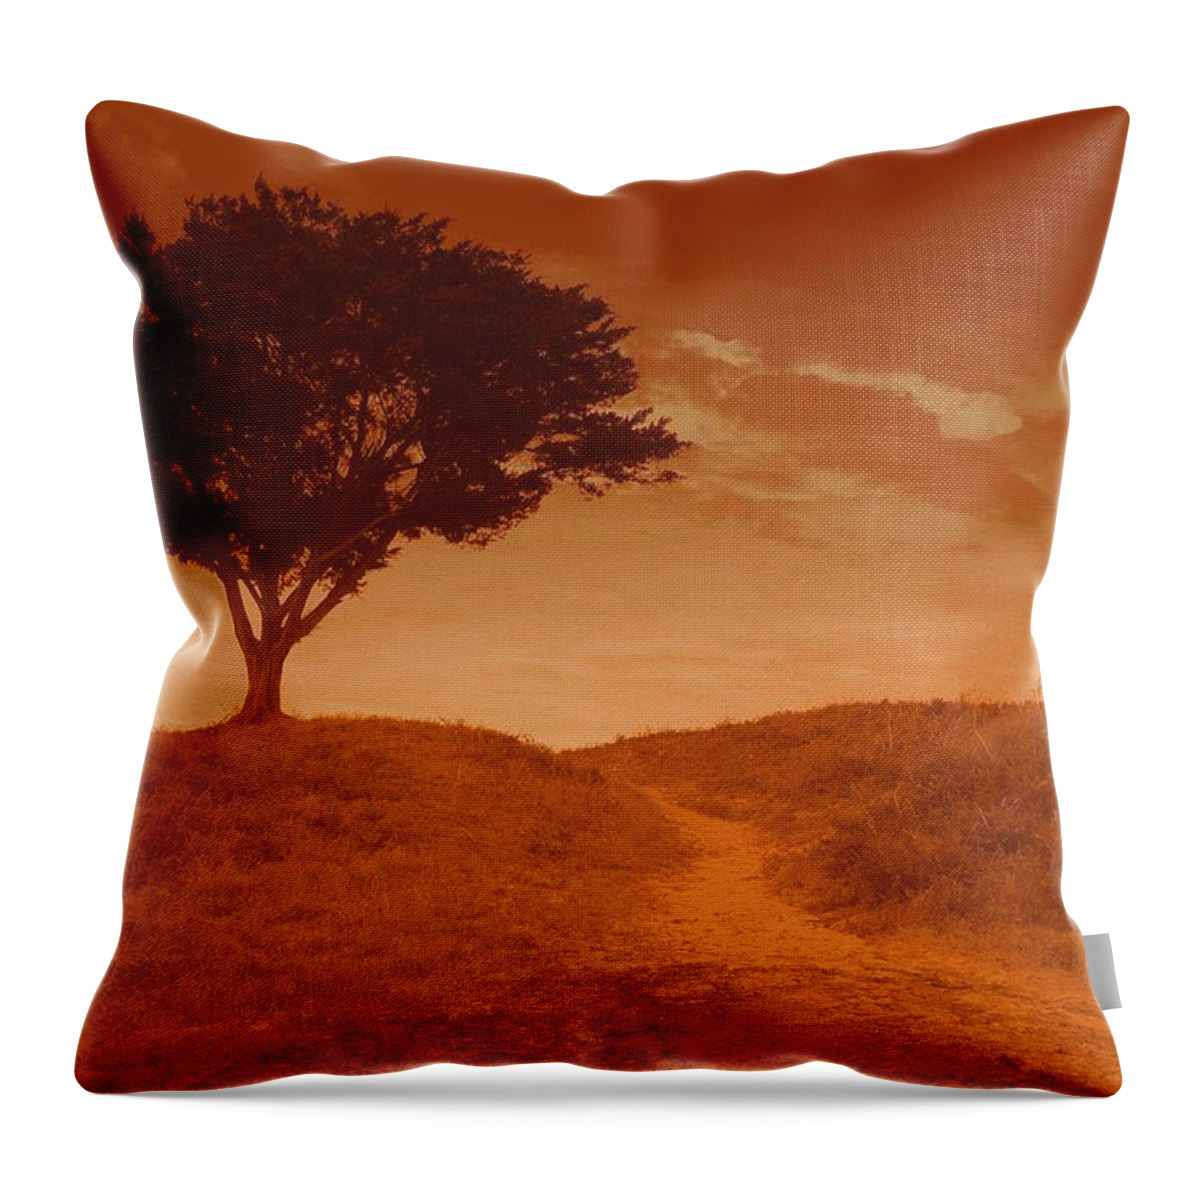 Landscape Throw Pillow featuring the photograph Sundown Alone by Julie Lueders 